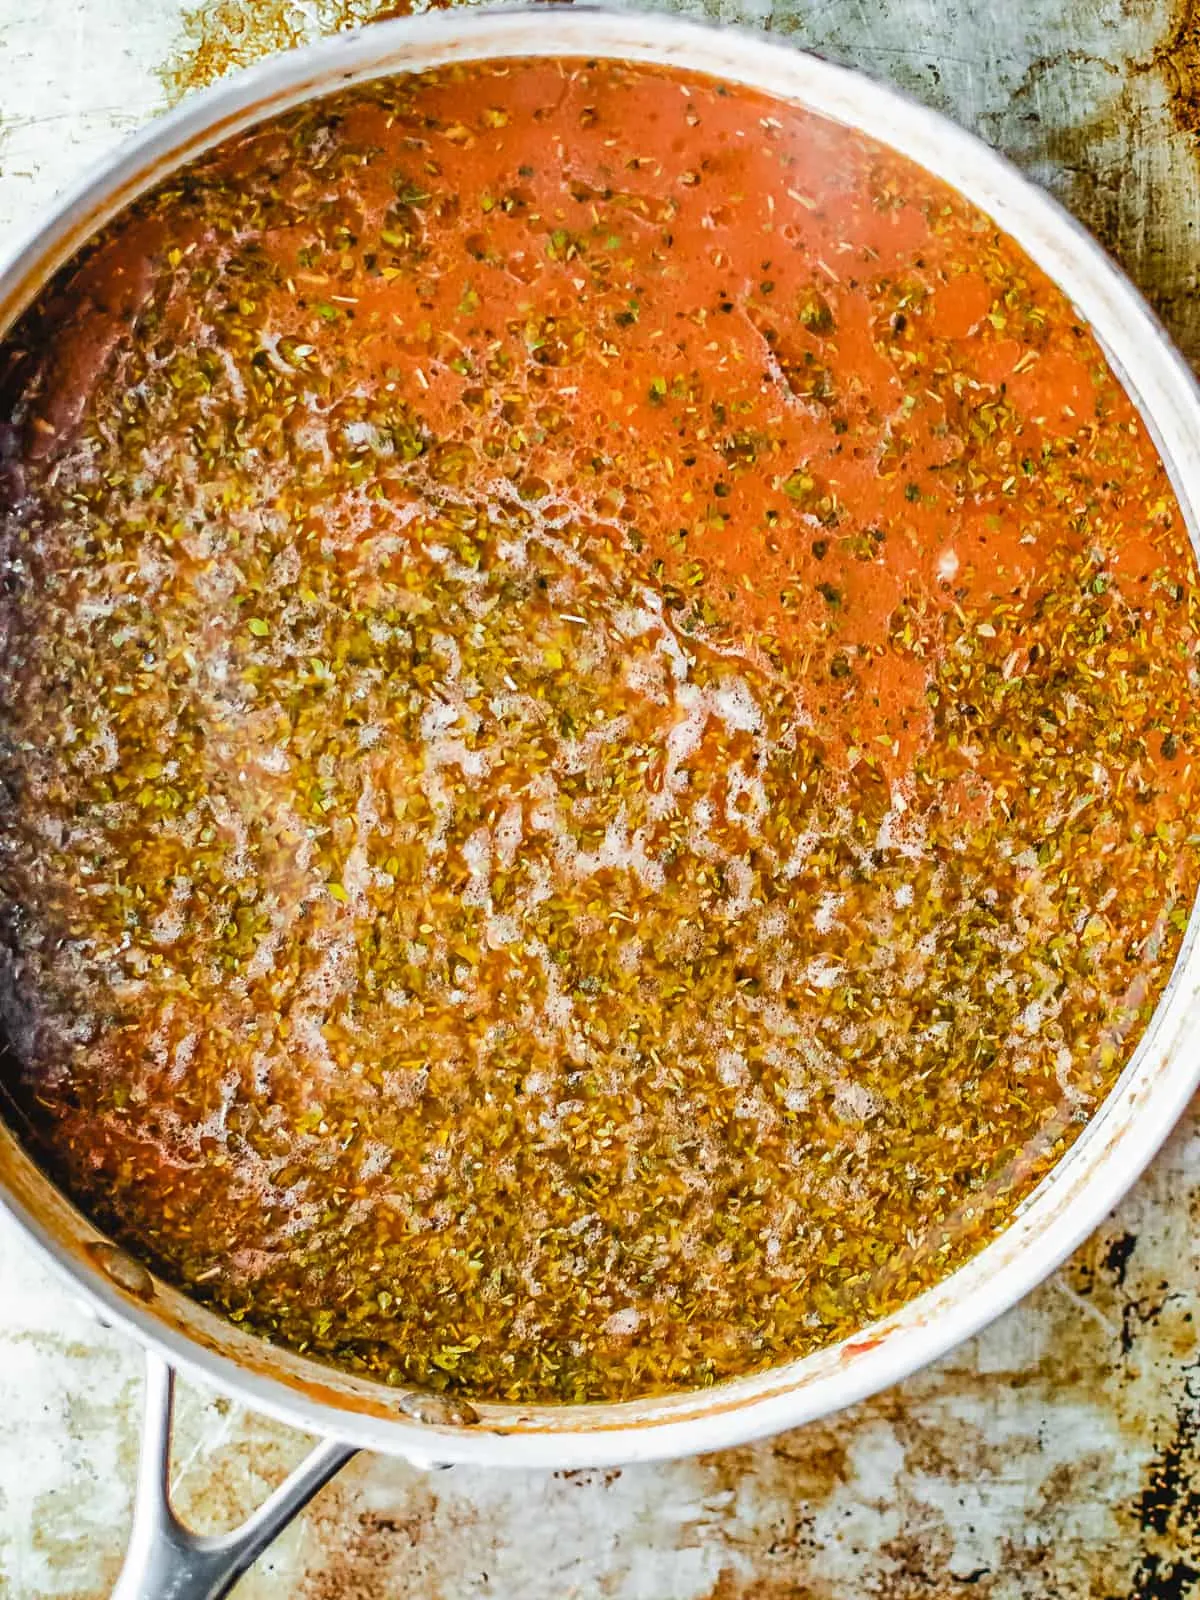 Seasonings and chicken stock in a skillet with ground beef and tomato paste.